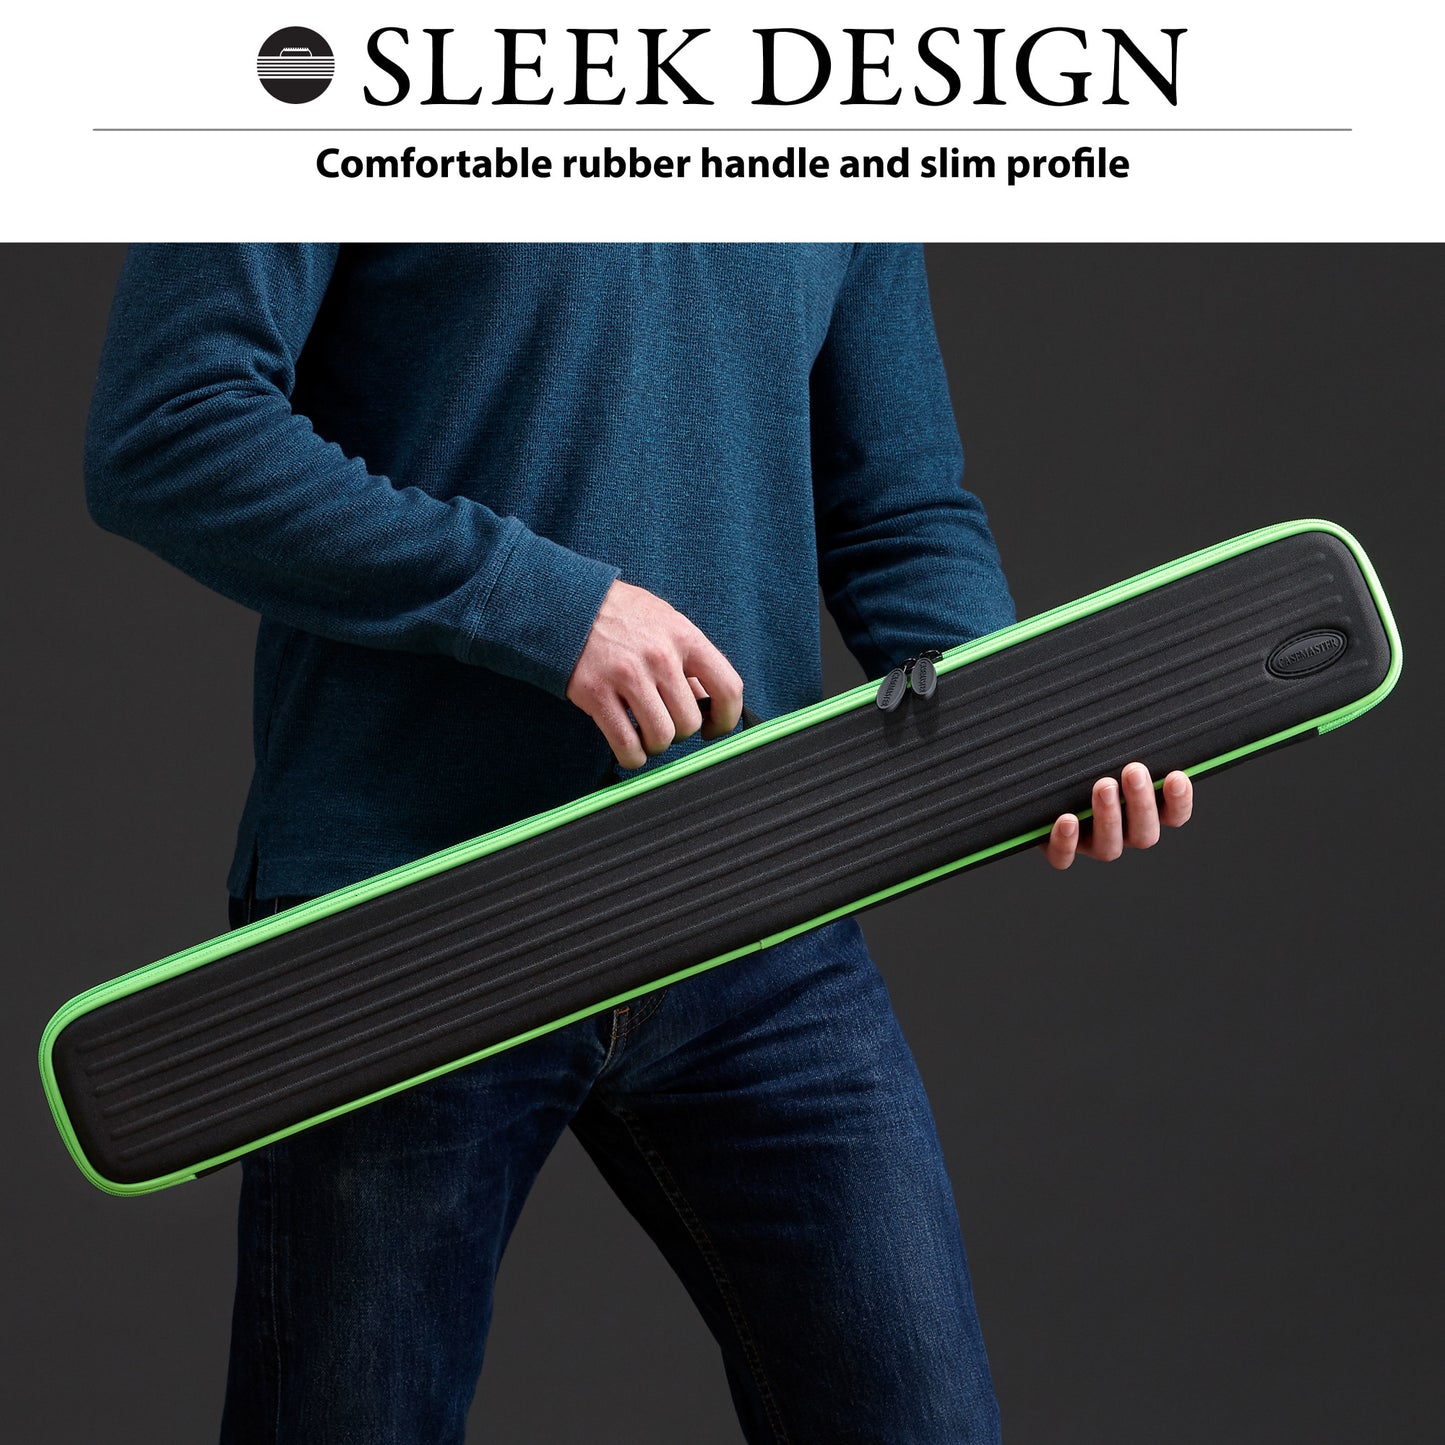 Casemaster Parallax Cue Case Green hand carried by a person showing the sleek design and comfortable rubber handle